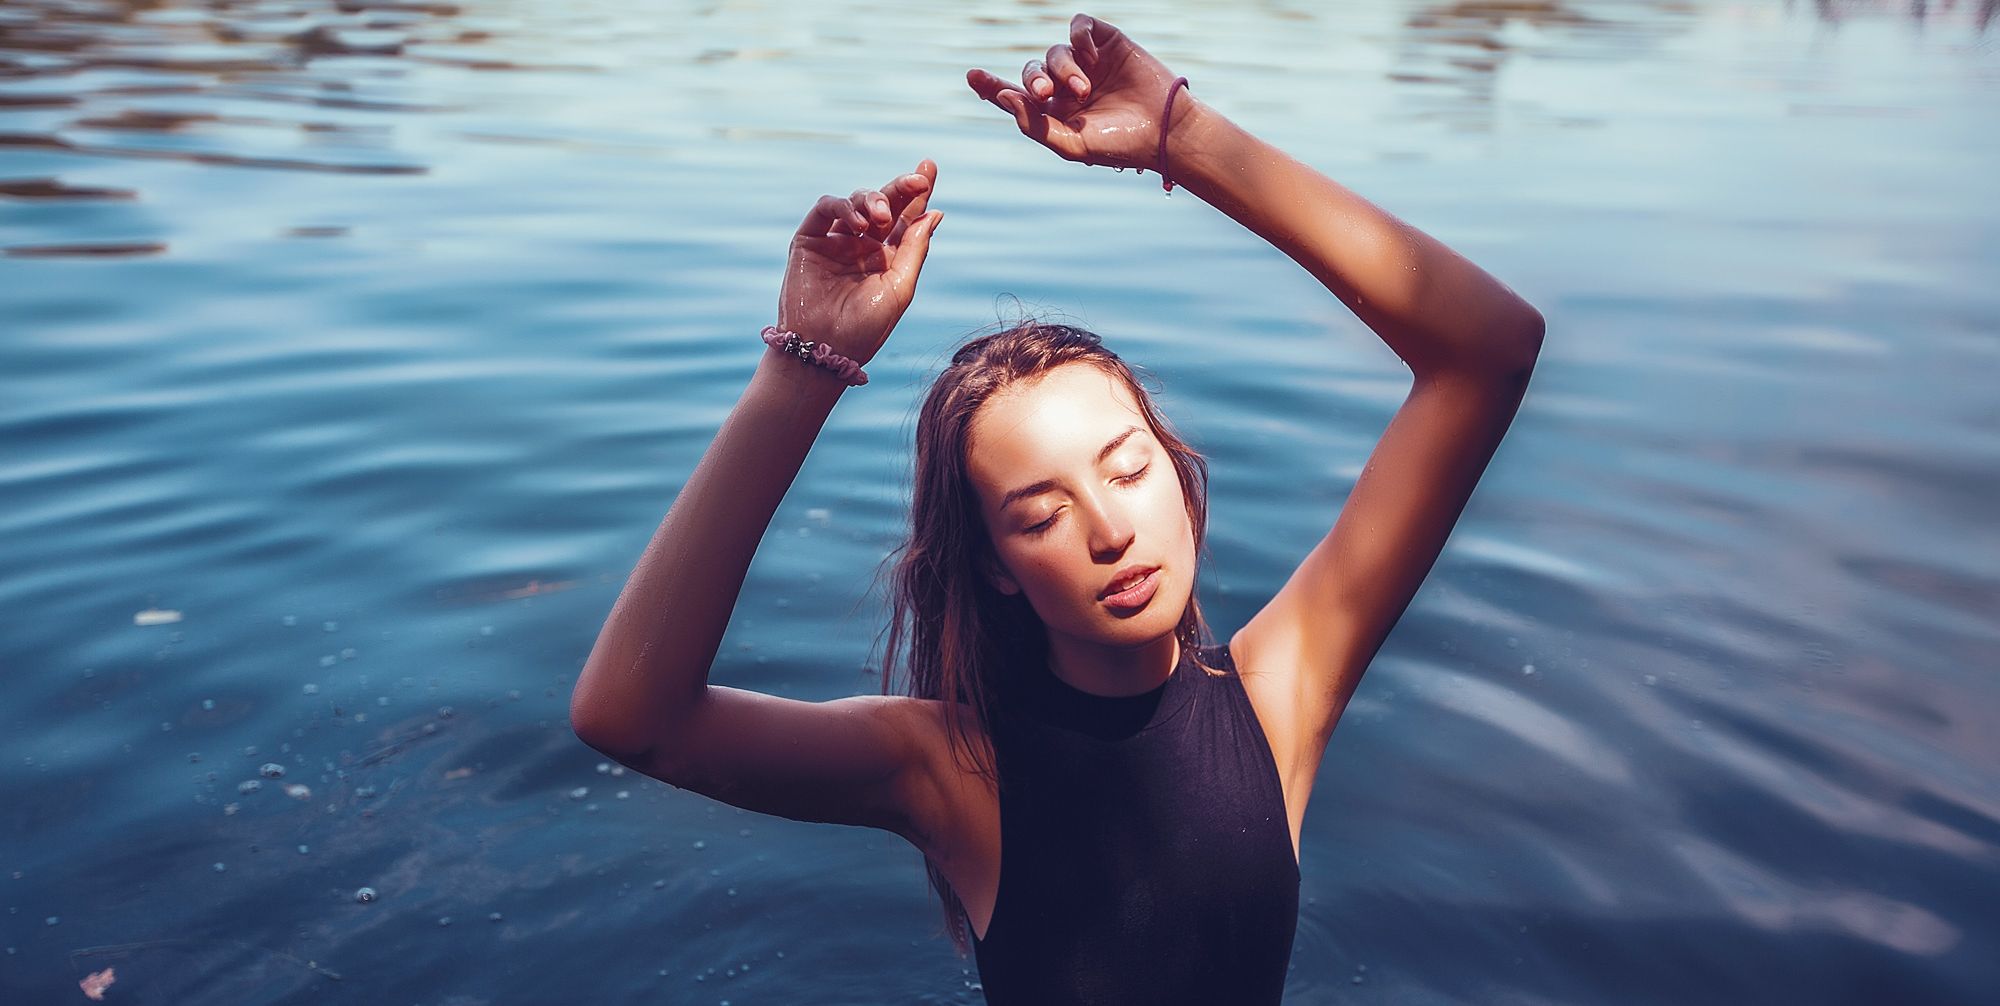 Water, Facial expression, Blue, Fun, Beauty, Happy, Smile, Arm, Hand, Reflection, 